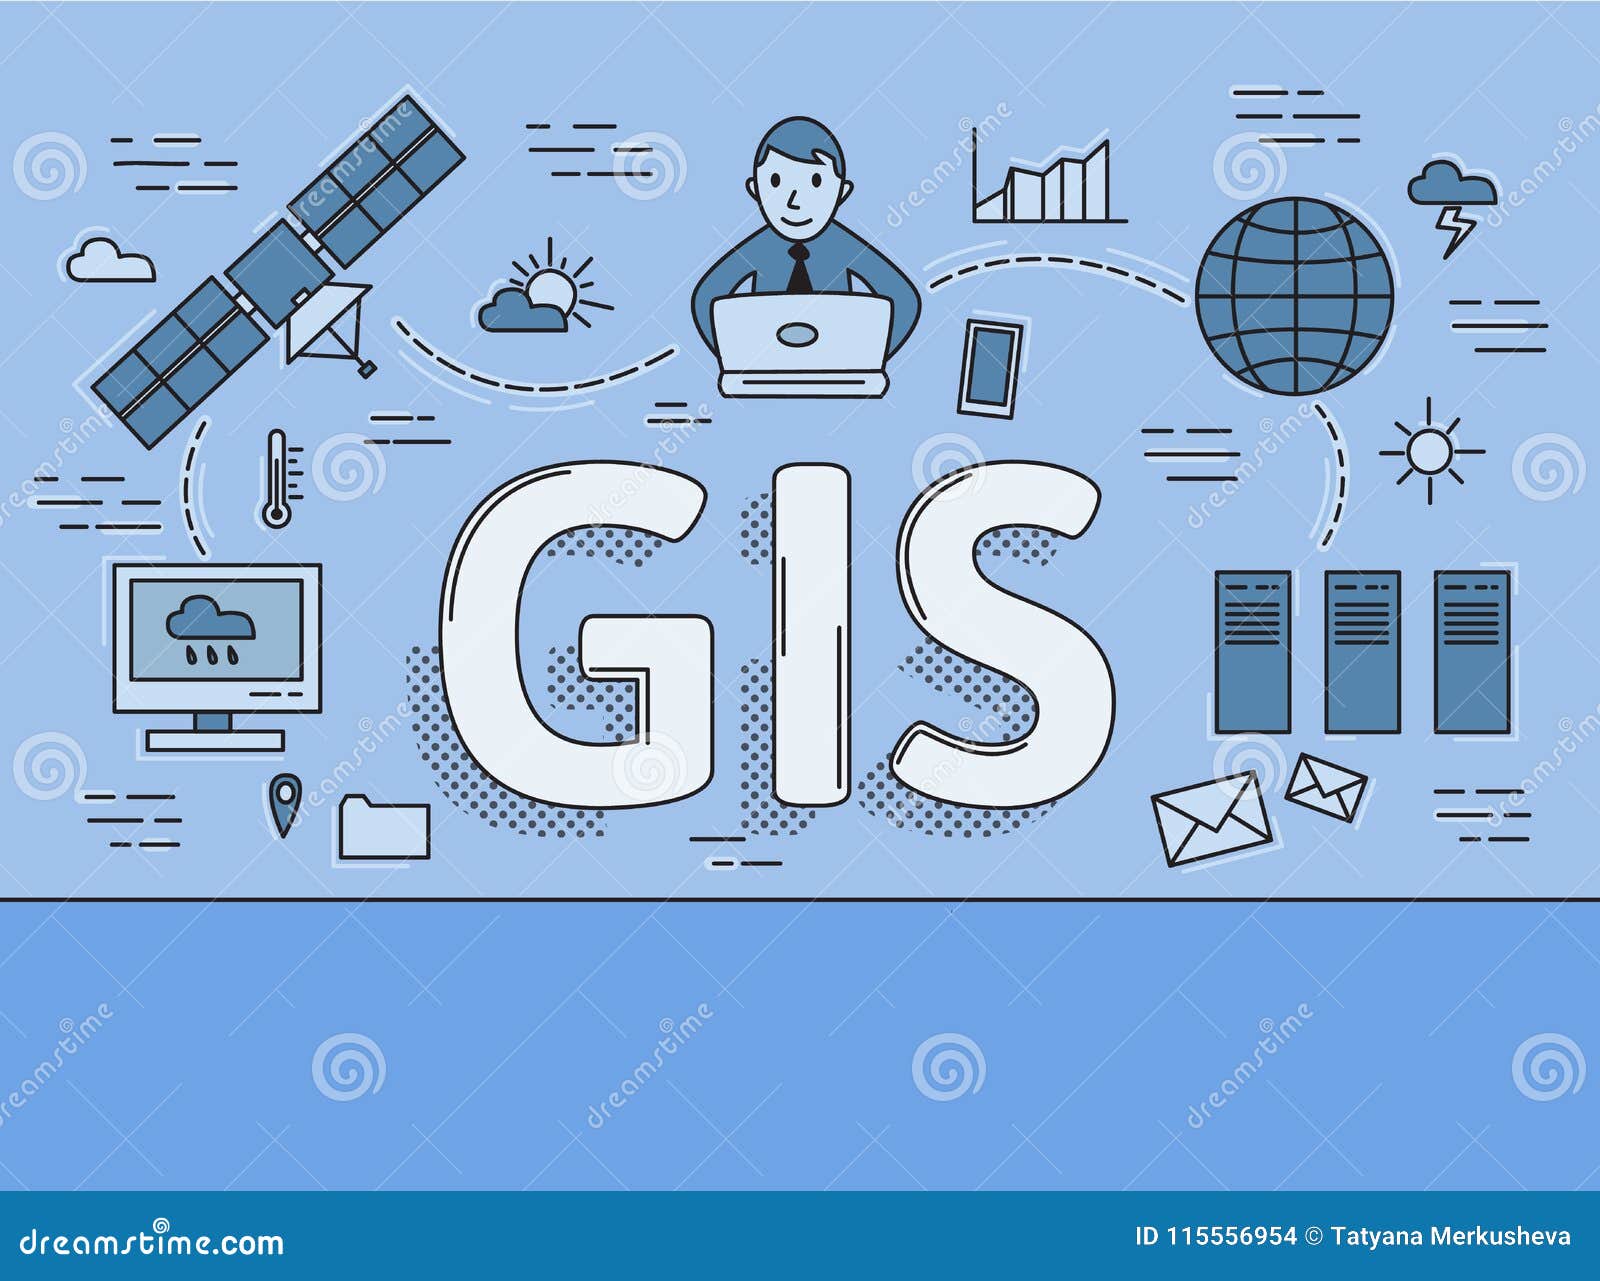 geographic information system, gis flat line concept.   on blue background. horizontal.